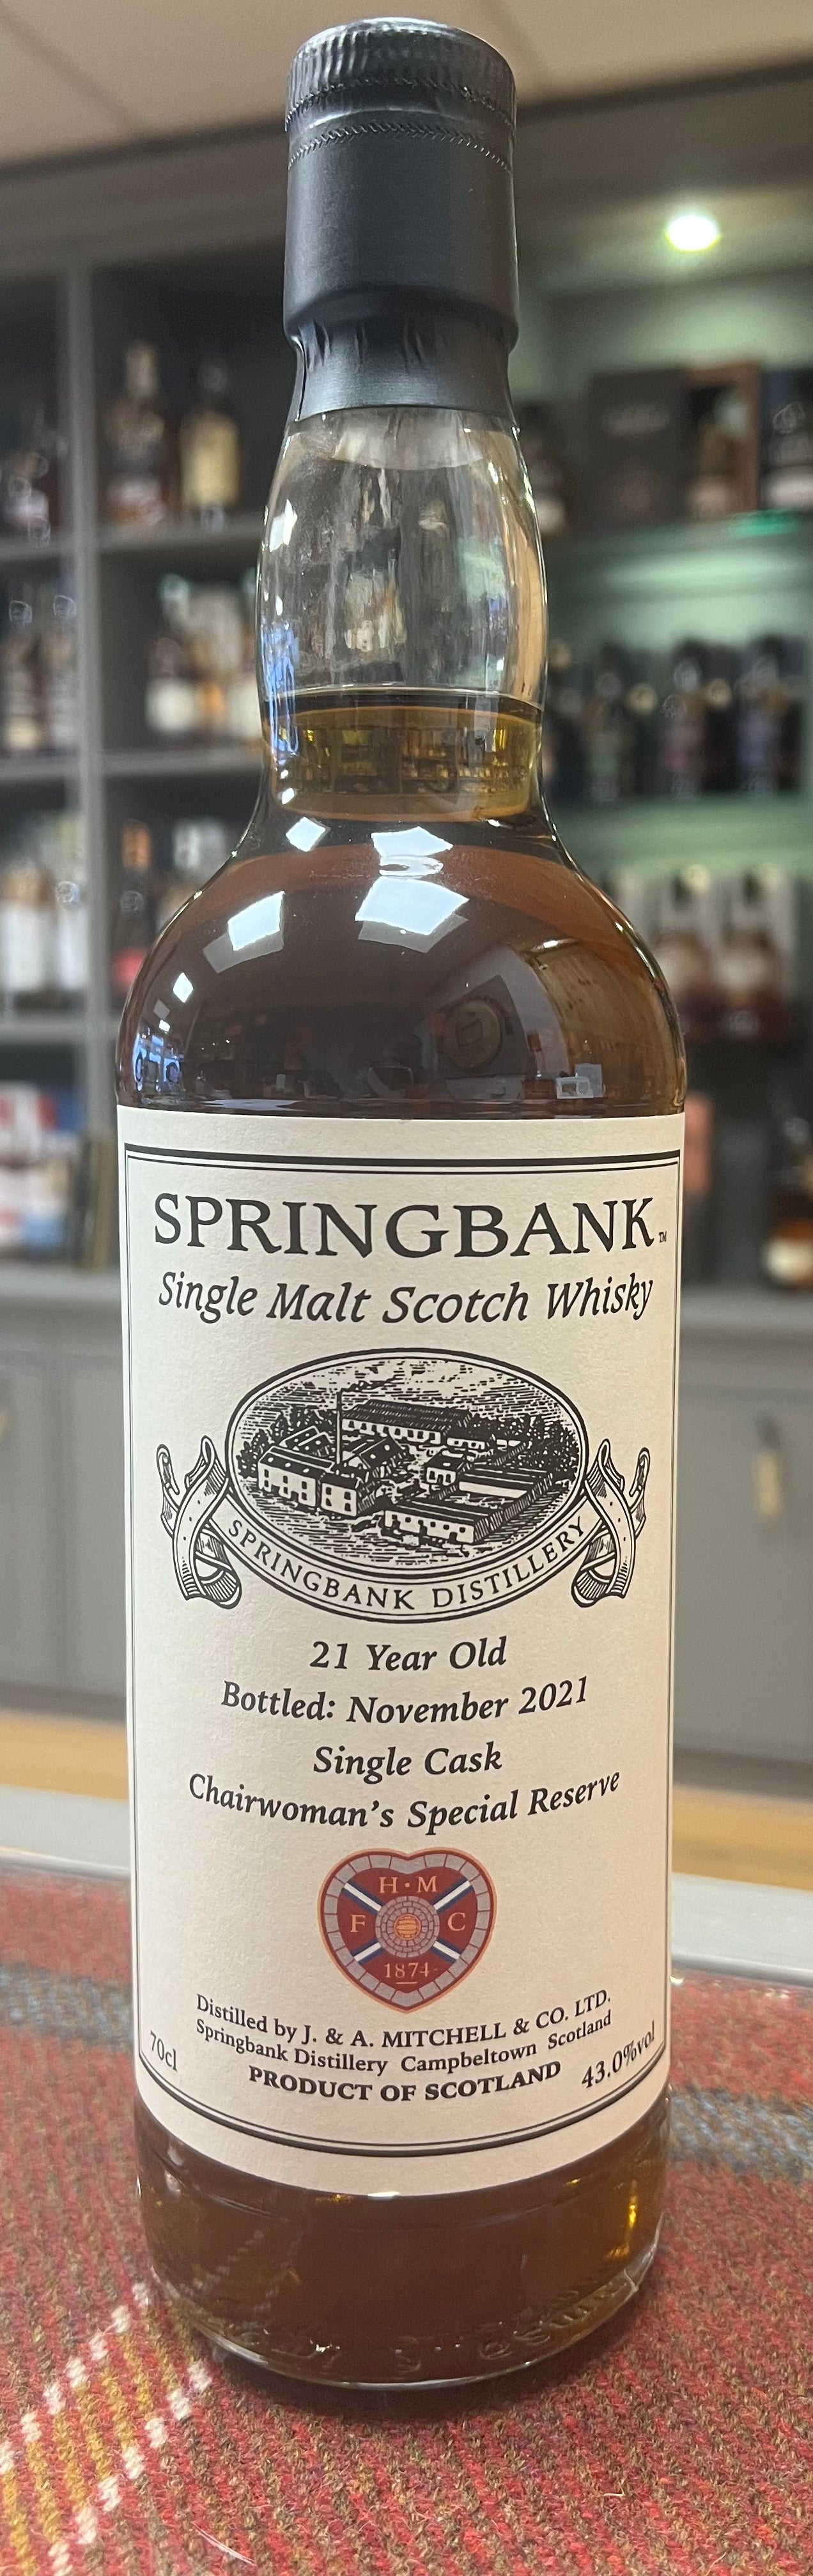 Springbank 21 Year Old Single Cask, Chairwoman's Special Reserve Heart of Midlothian Football Club  (70cl, 43.0%)